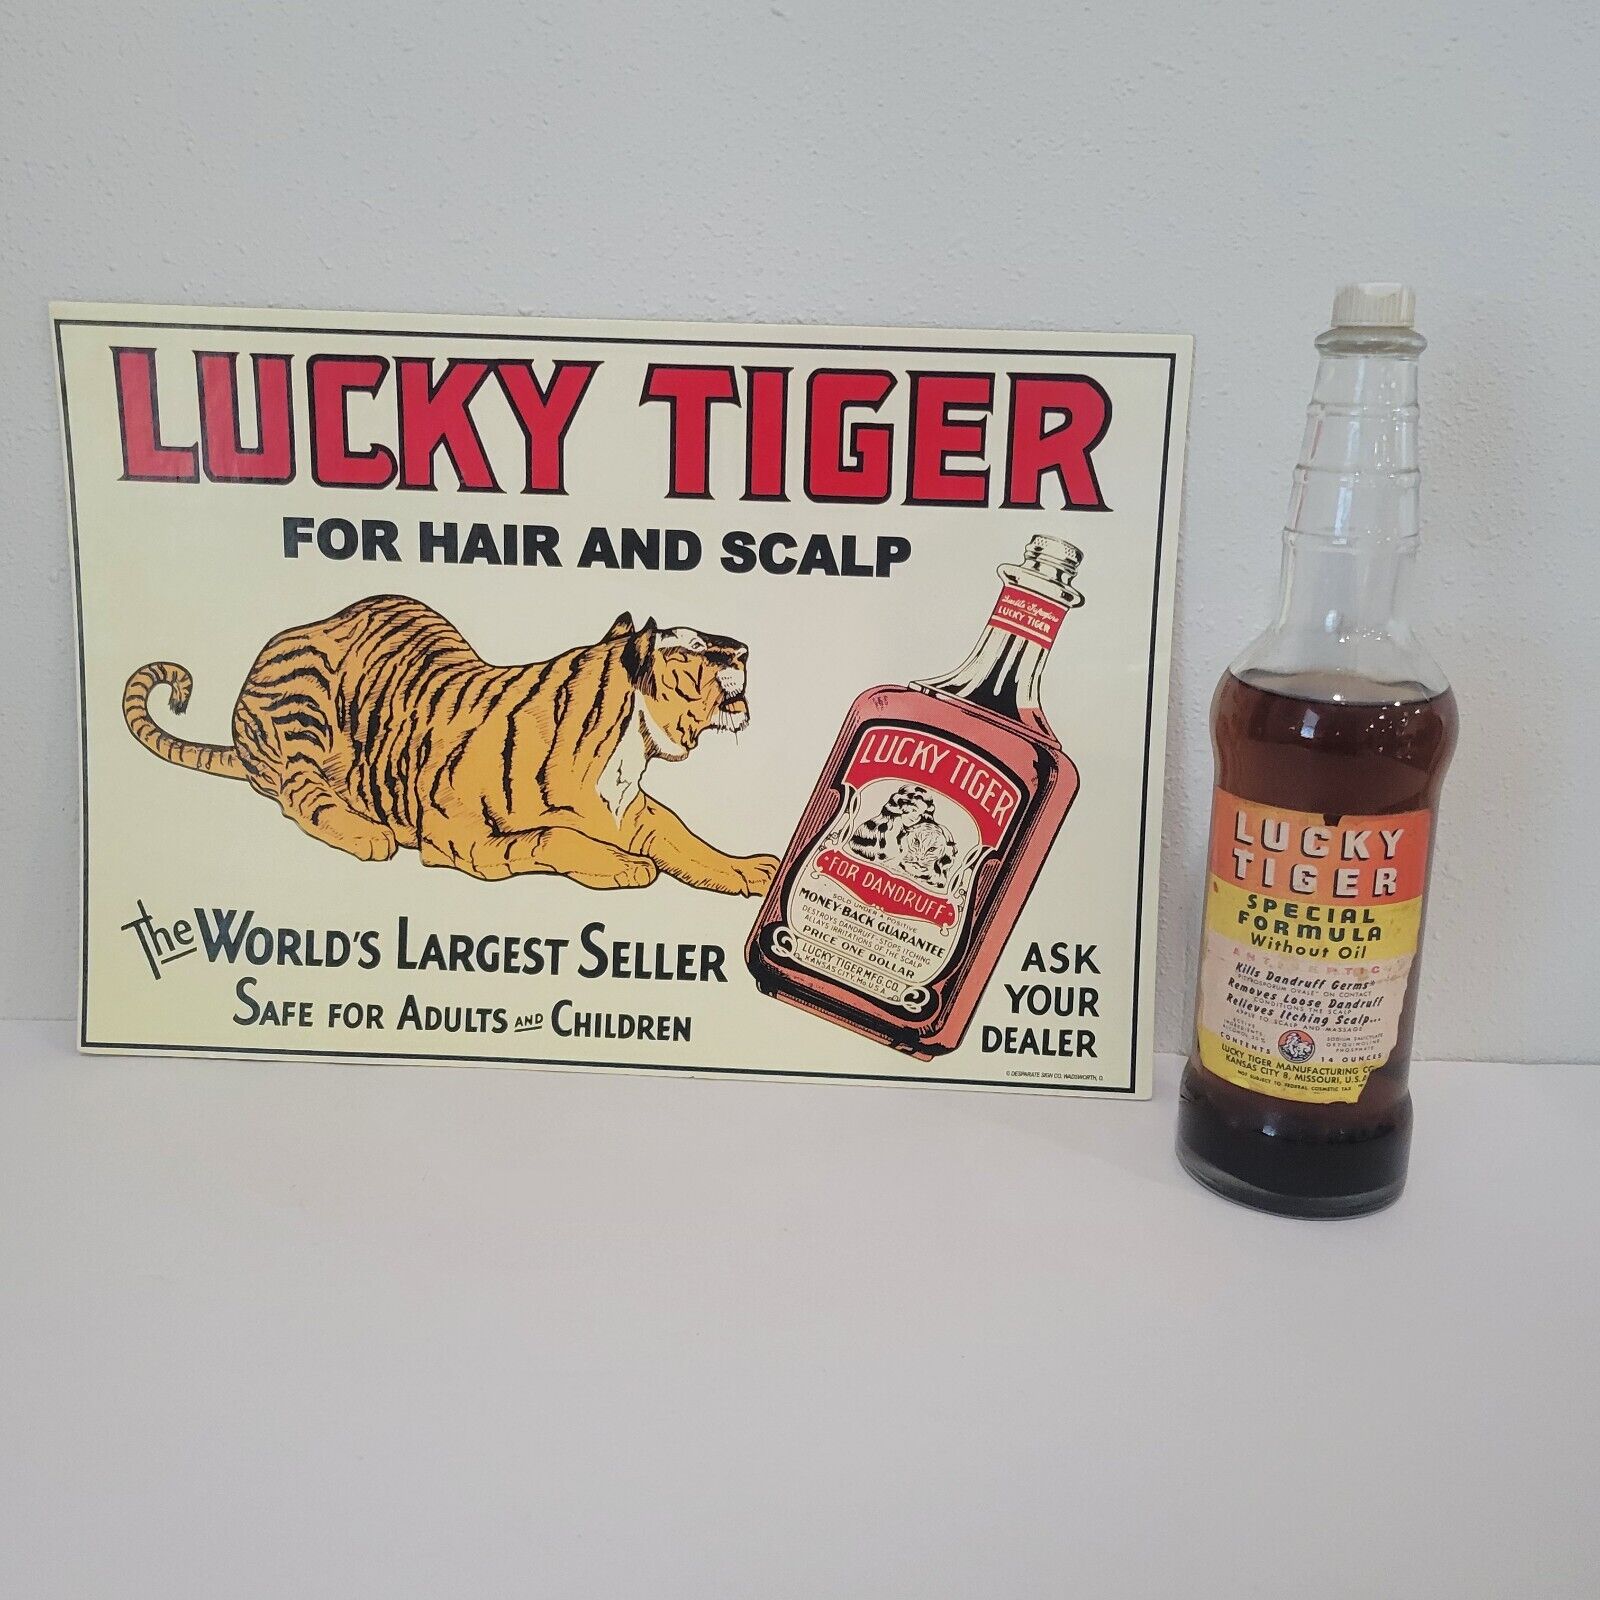 Vintage Lucky Tiger Special Formula Cardboard 14 x 10 in Sign and Bottle